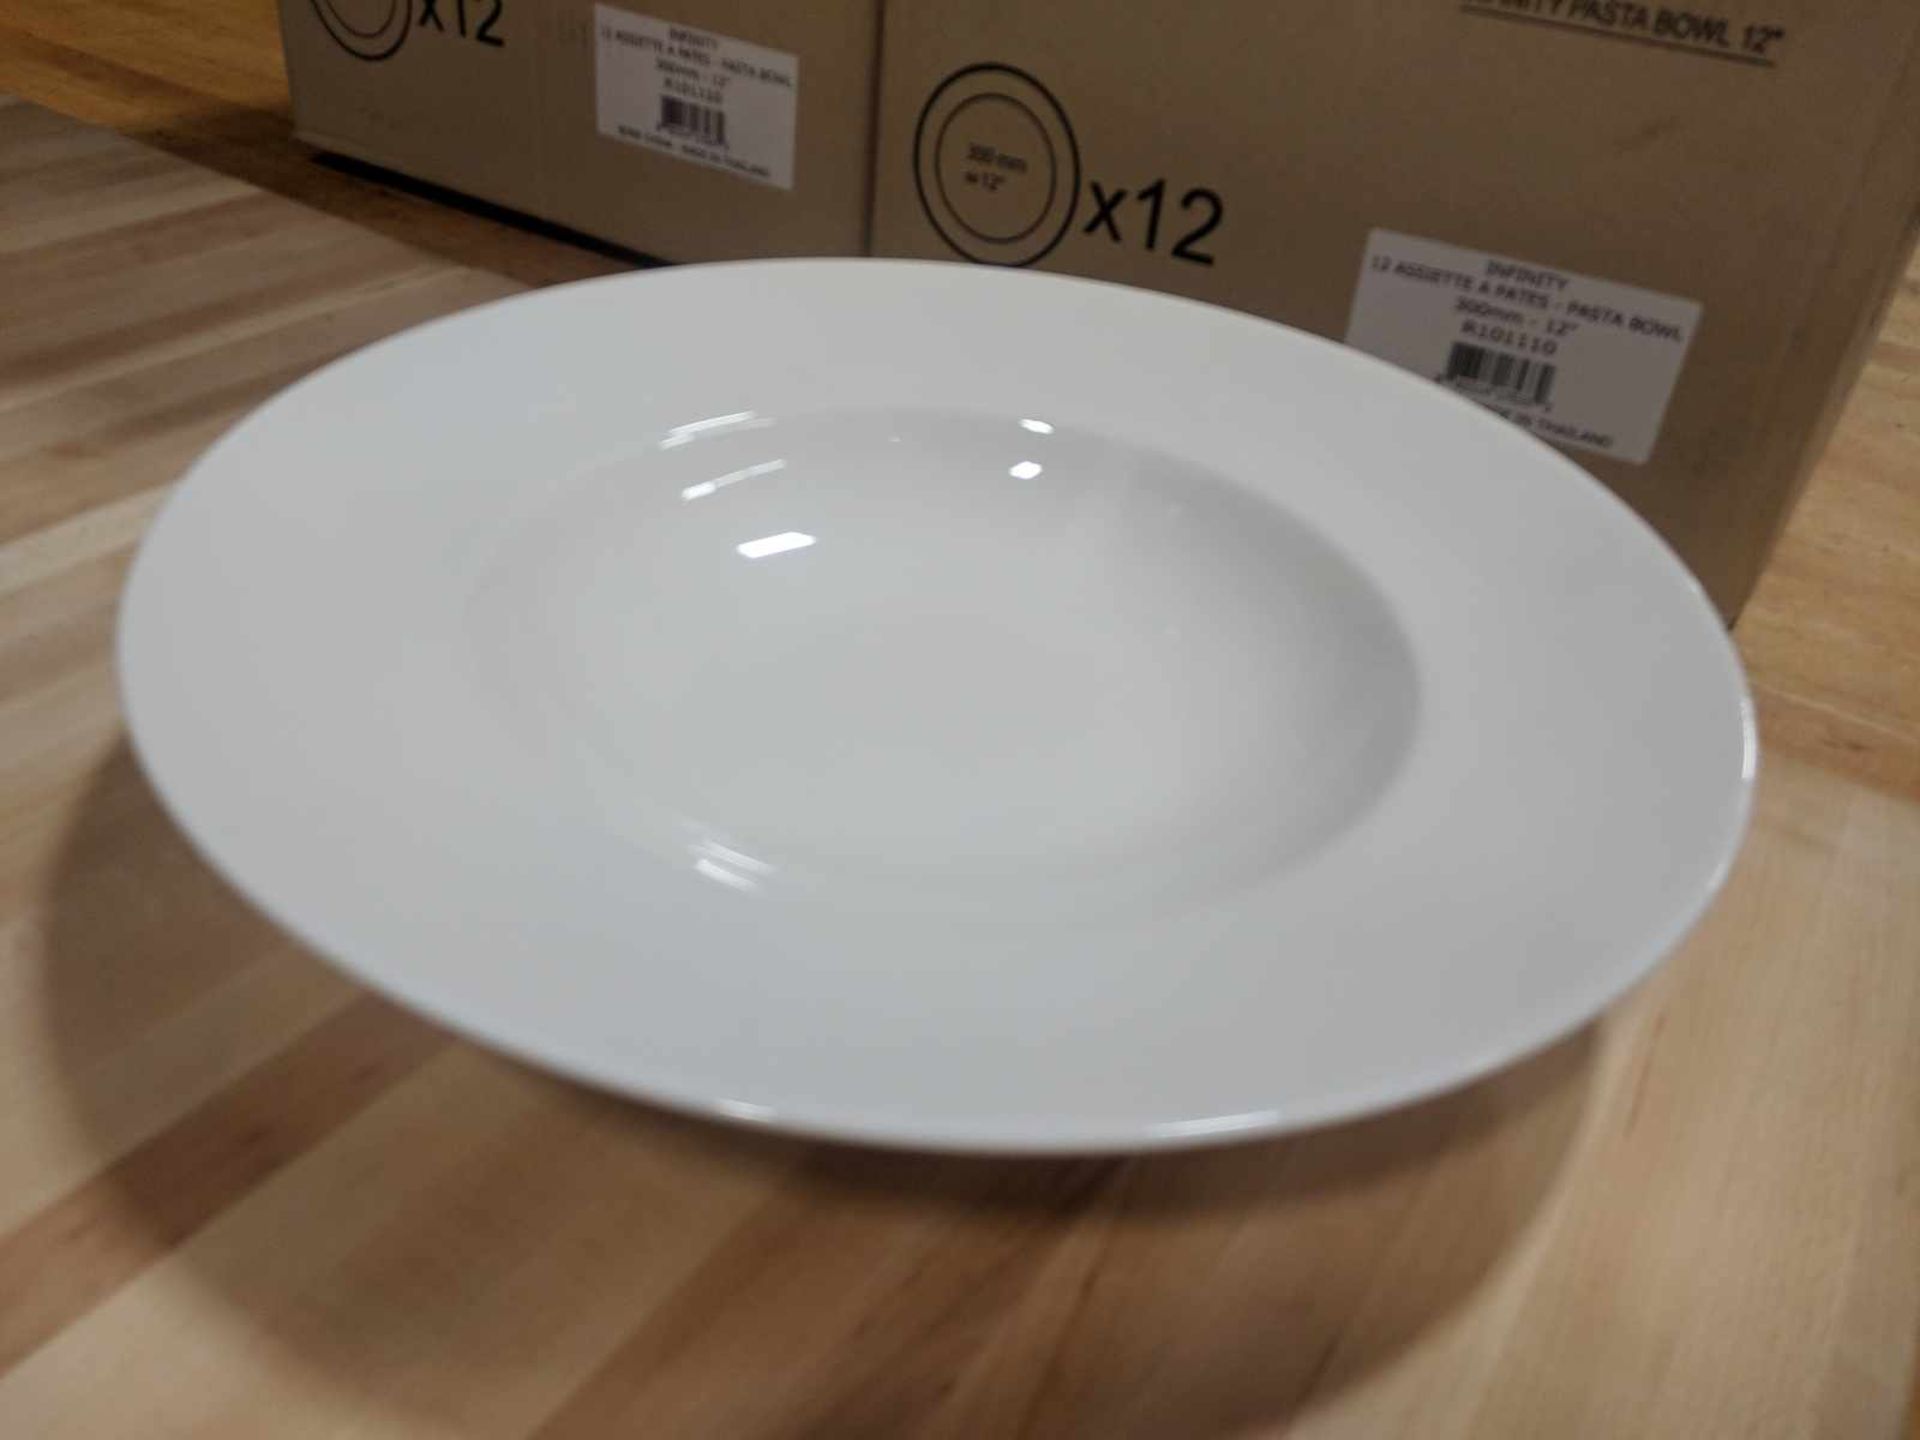 12" Infinity Pasta Bowls, 20oz - Lot of 12 (1 Case), Arcoroc R1011 - Image 2 of 2